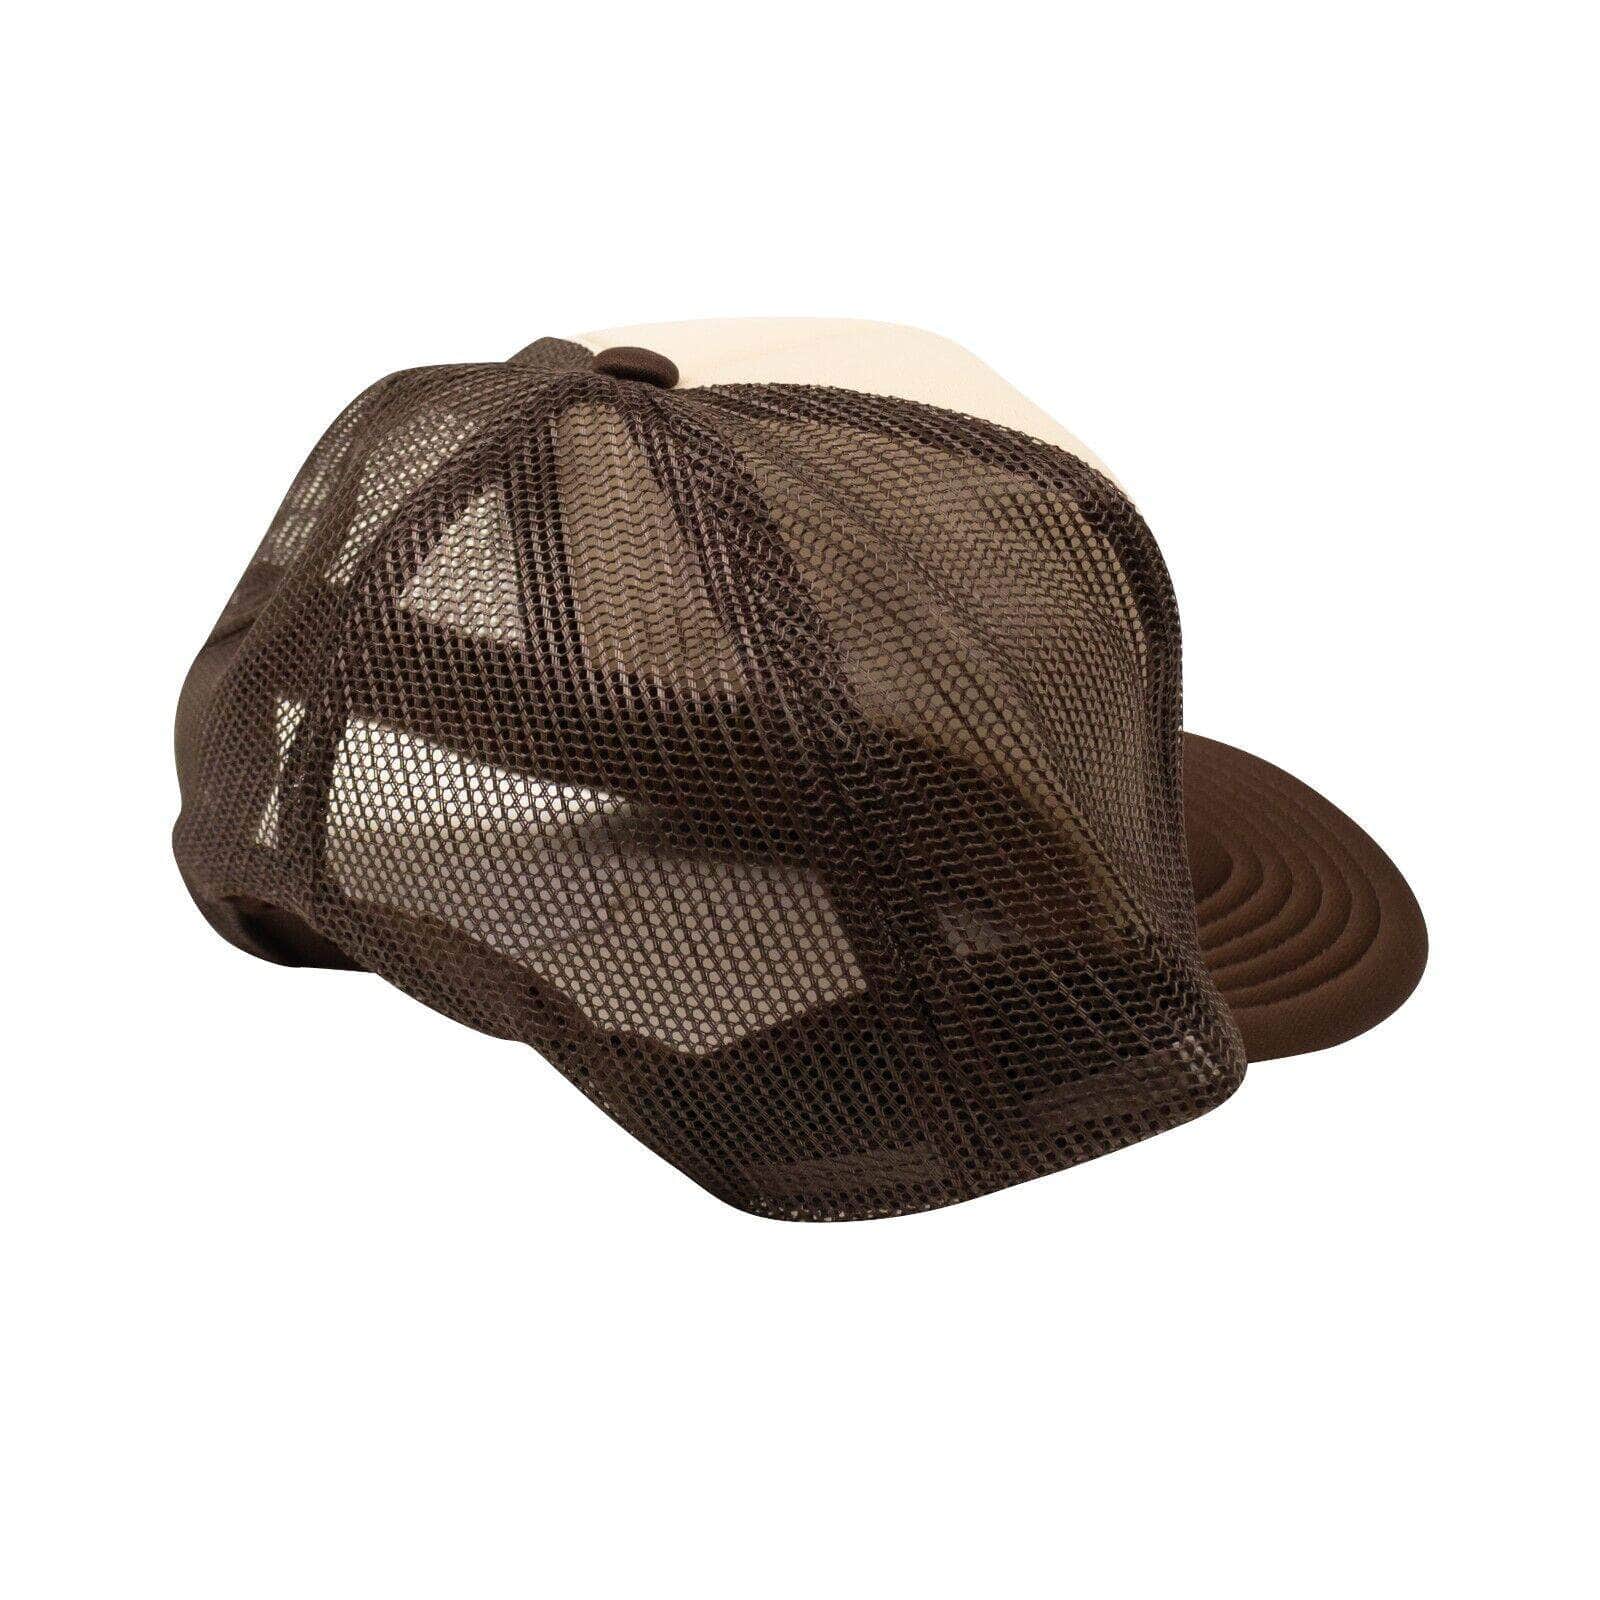 Sicko channelenable-all, chicmi, couponcollection, gender-mens, main-accessories, mens-shoes, sicko, size-os, under-250 OS Brown Working Like a Sicko Trucker Hat SCK-XACC-0012/OS SCK-XACC-0012/OS